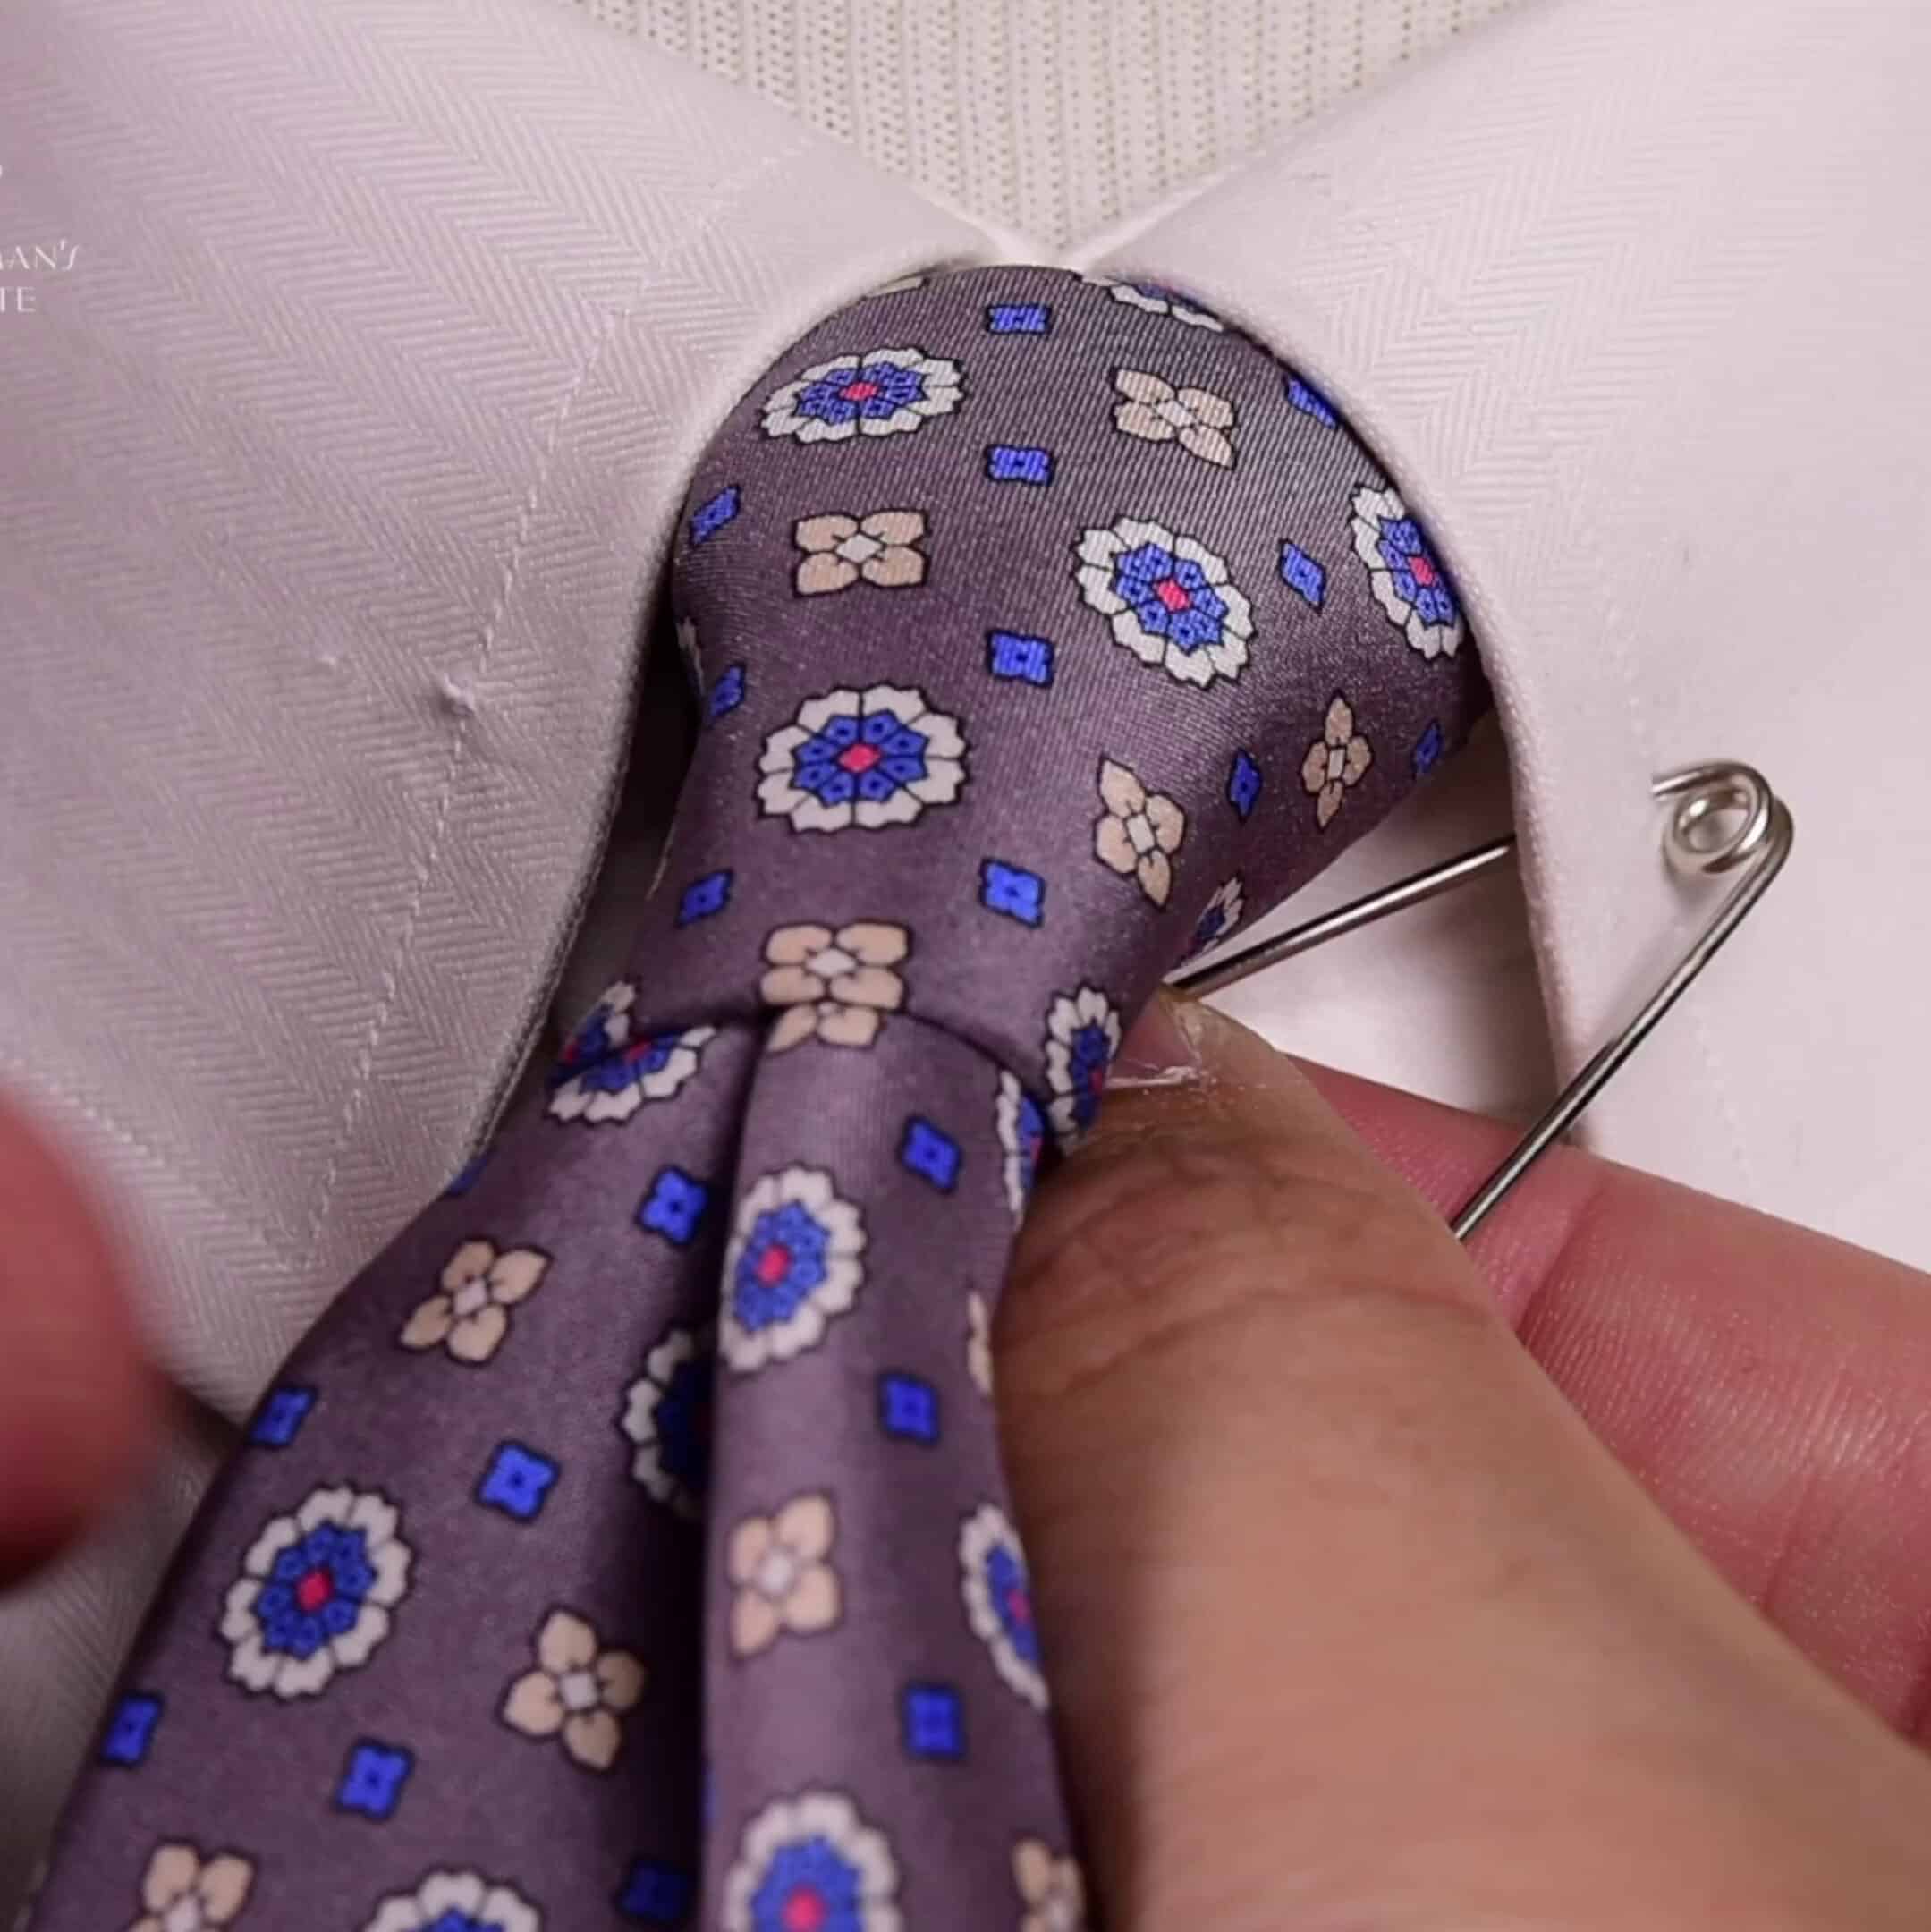 Collar pins are attached to your shirt collars by piercing both sides.